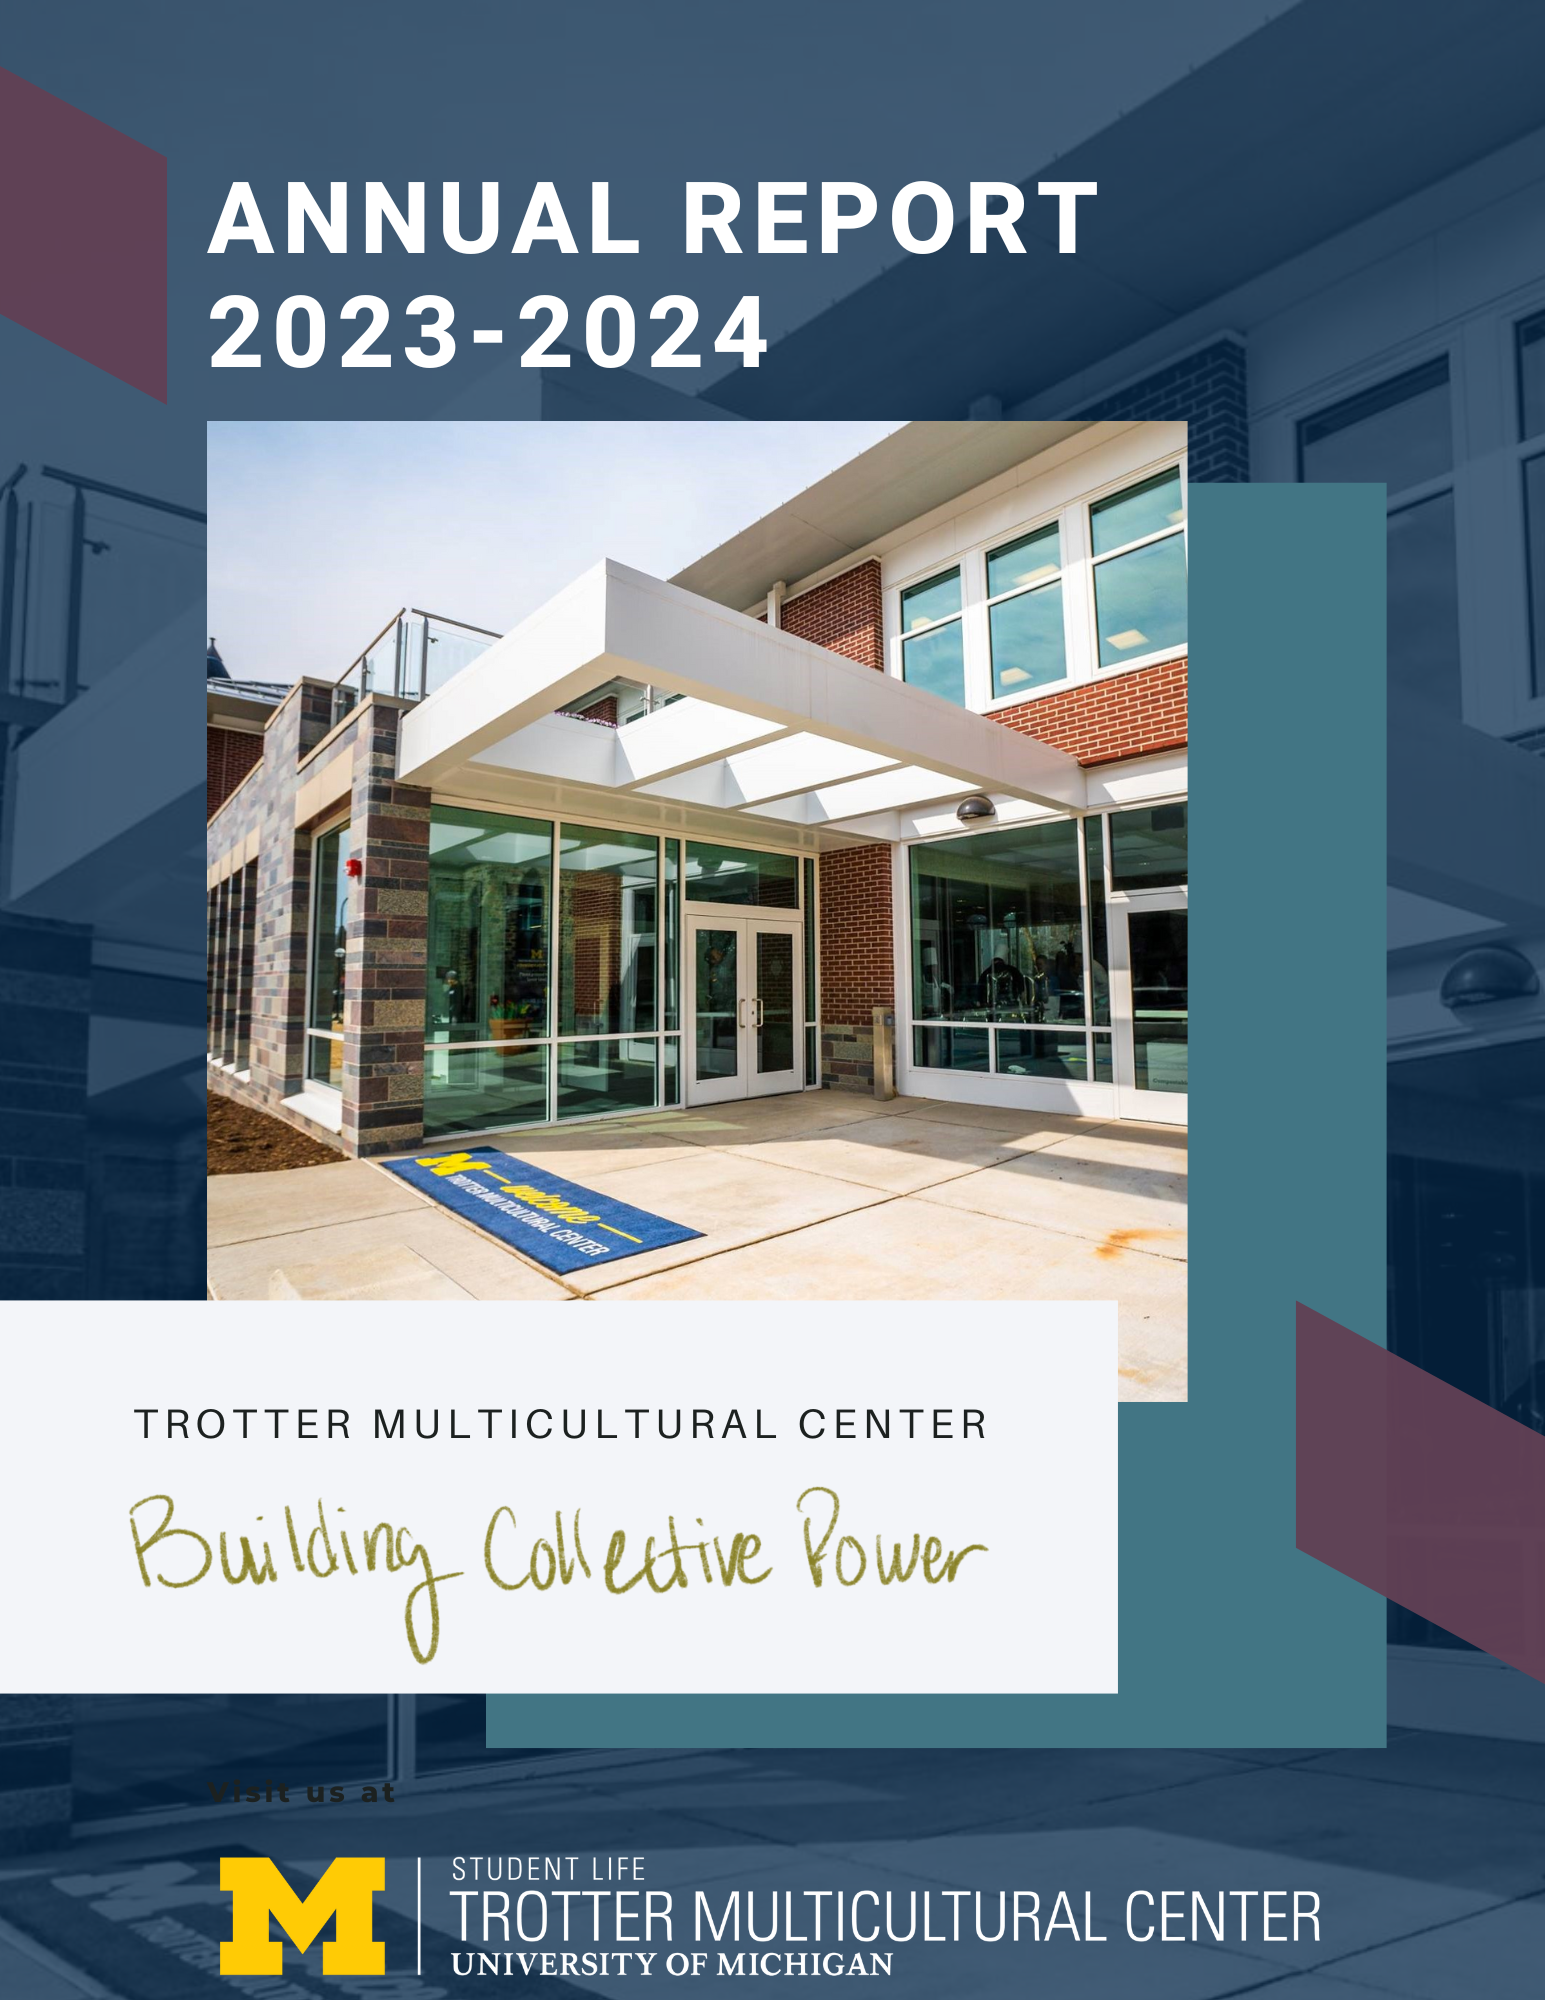 Cover page of Trotter Multicultural Center's 2023-2024 annual report.